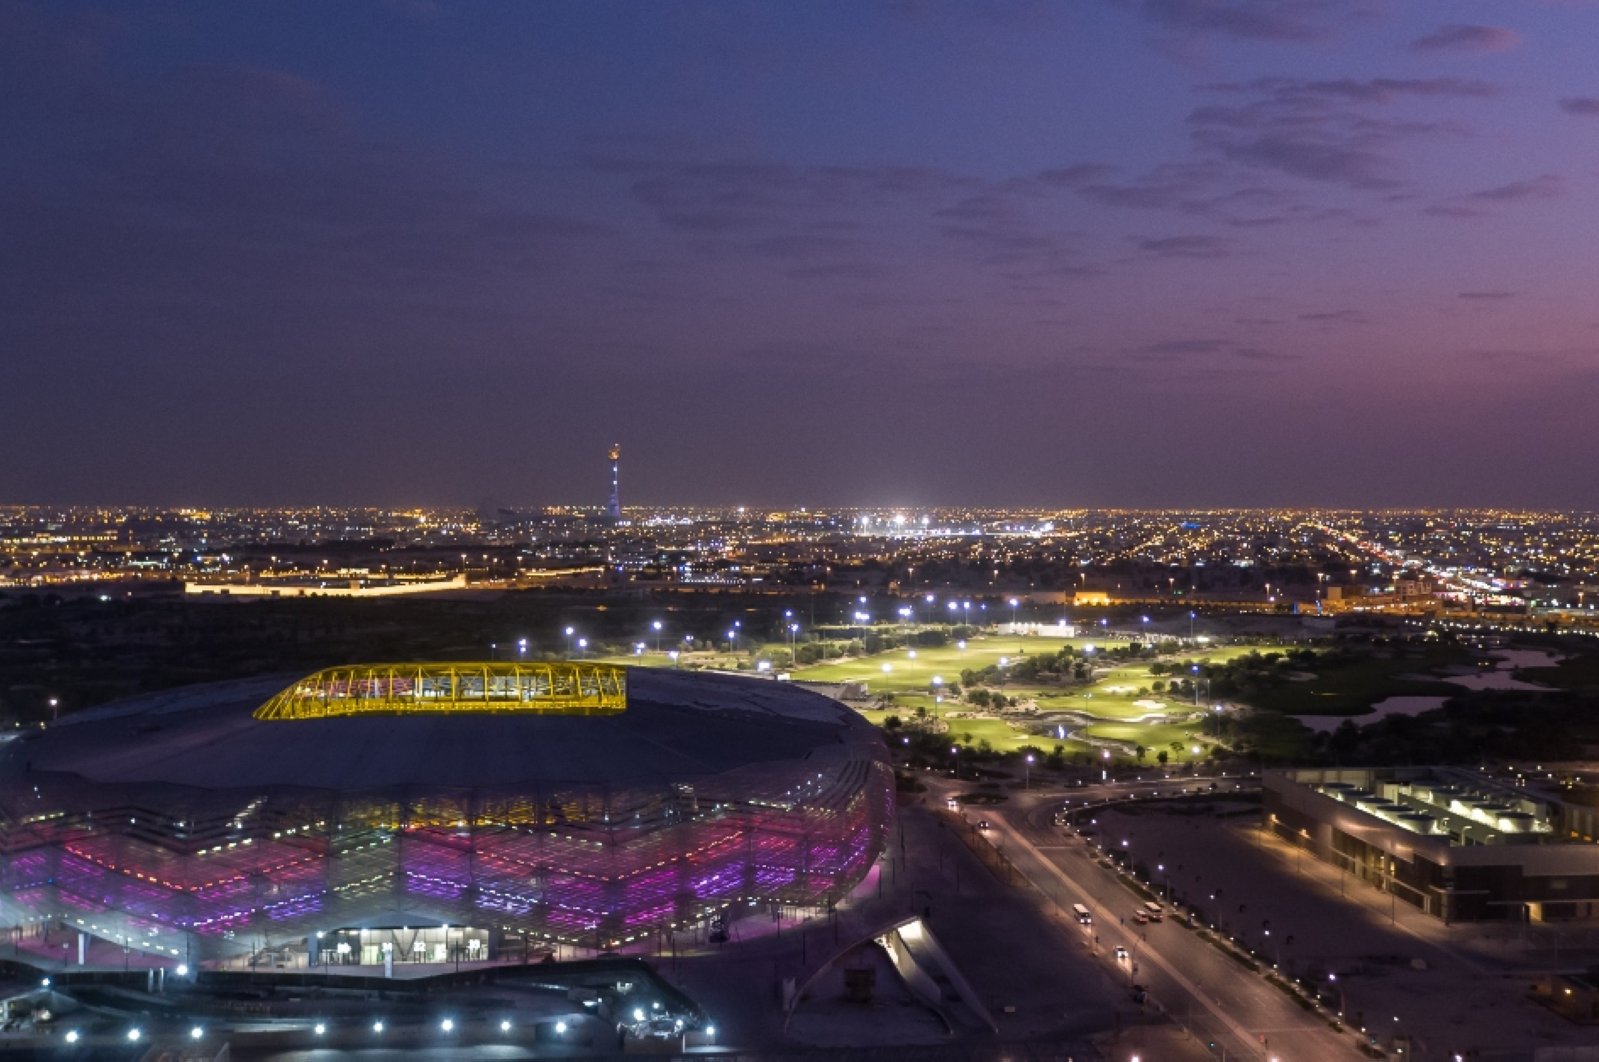 Qatar has reached 85% completion across the construction portfolio for the World Cup, said Nasser al-Khater, CEO of the FIFA World Cup Qatar 2022 LLC. (Courtesy of FIFA World Cup Qatar 2022 LLC)